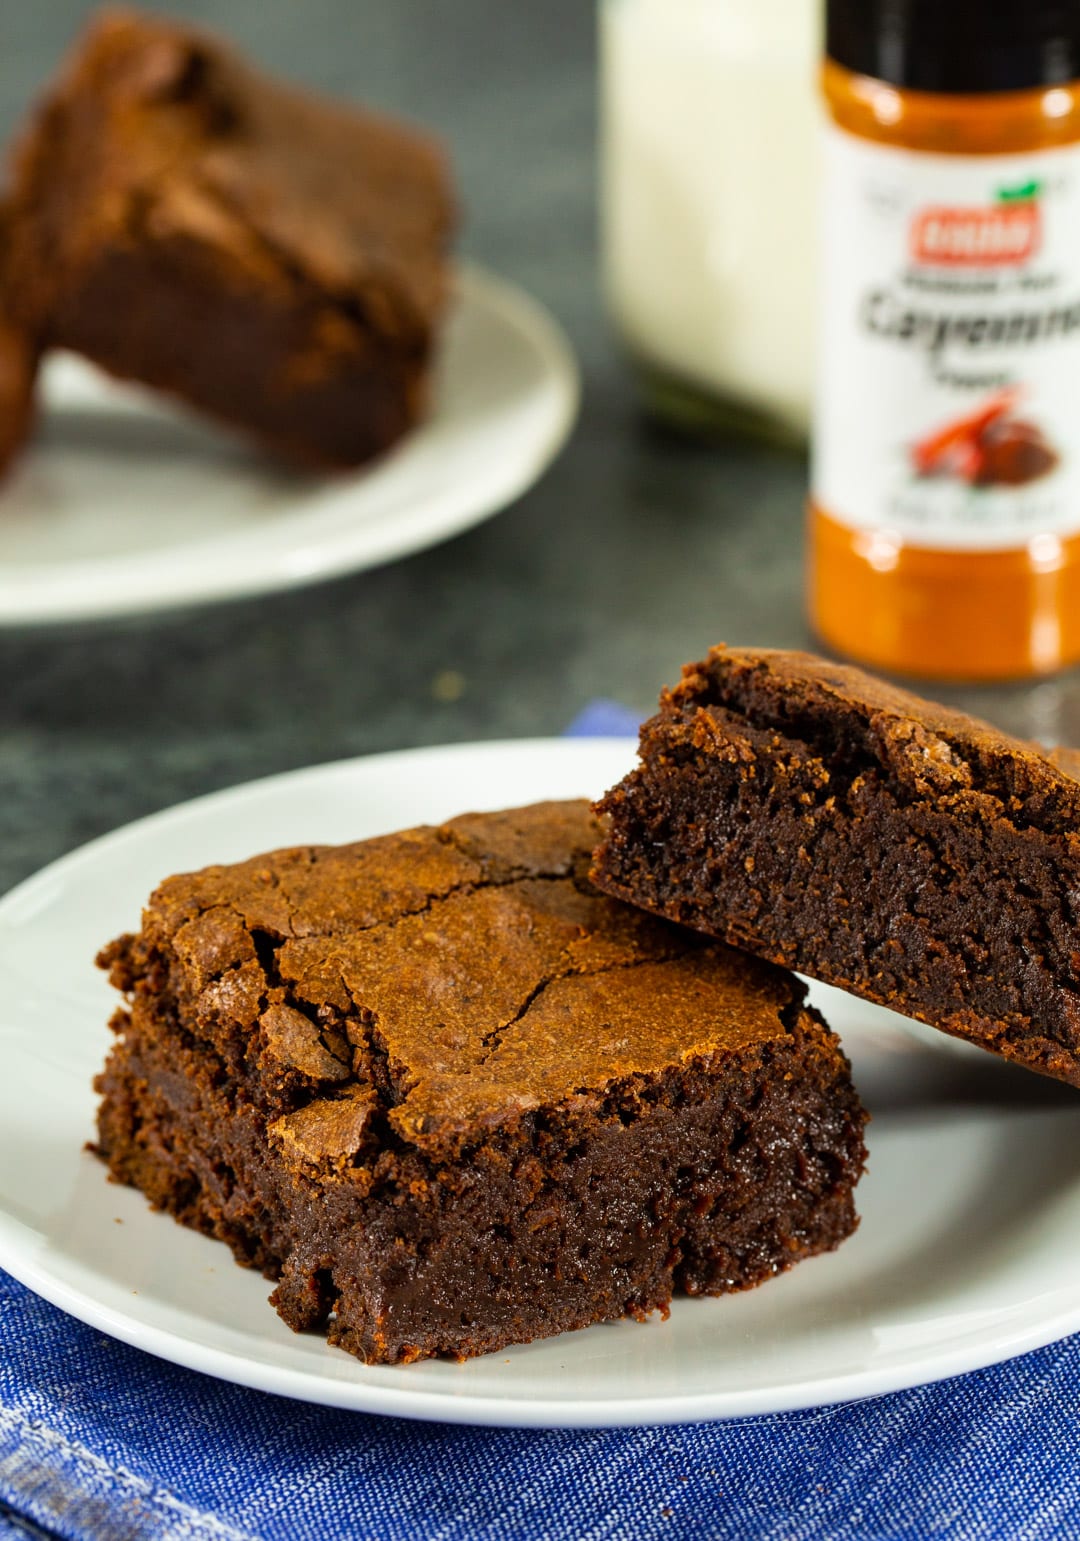 Two brownies on a plate.